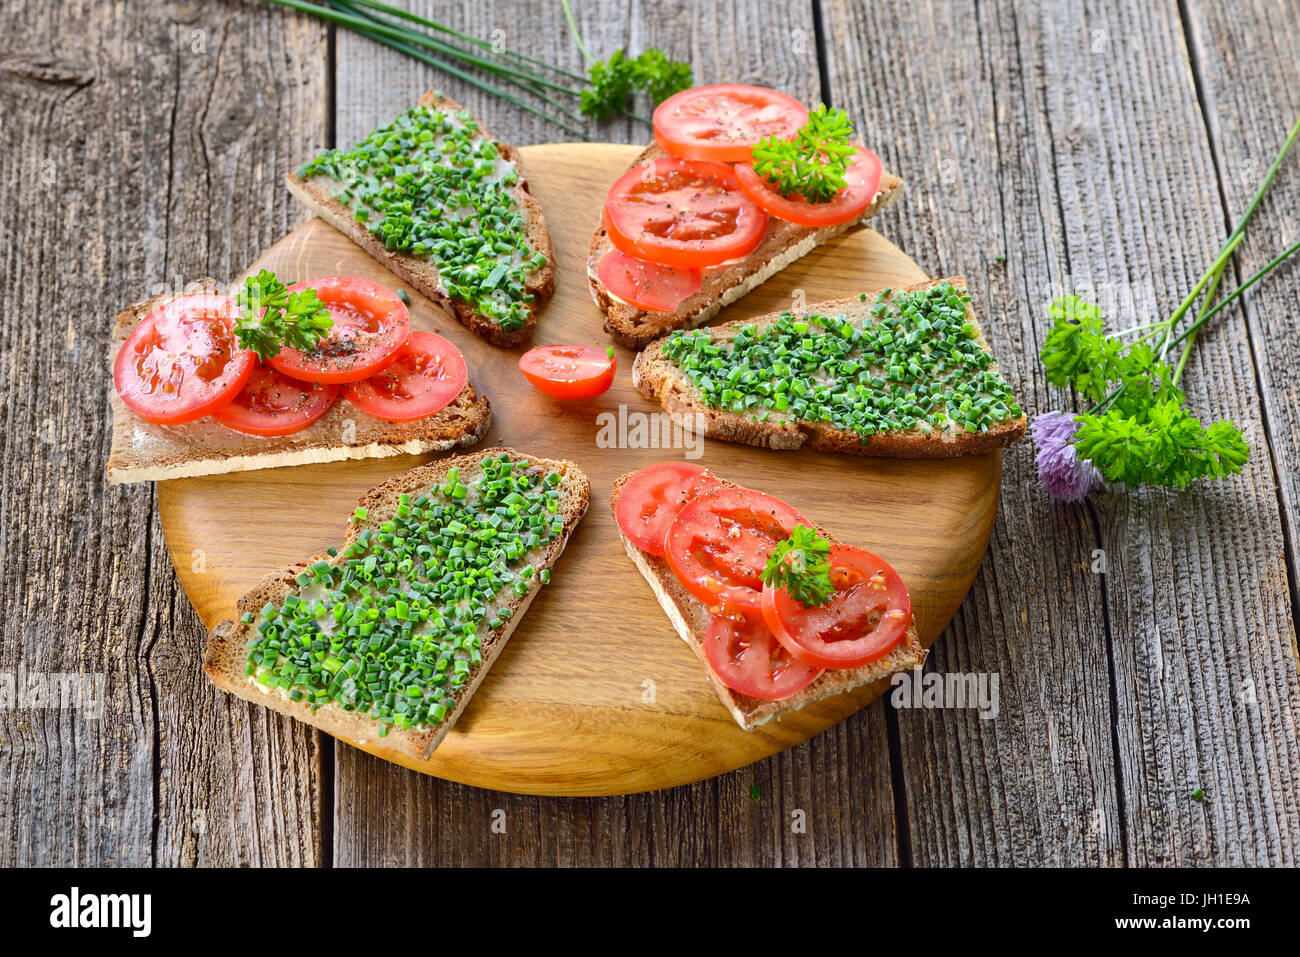 Vegetarian snack: Slices of buttered farmhouse bread with fresh chives and tomatoes on a wooden board Stock Photo